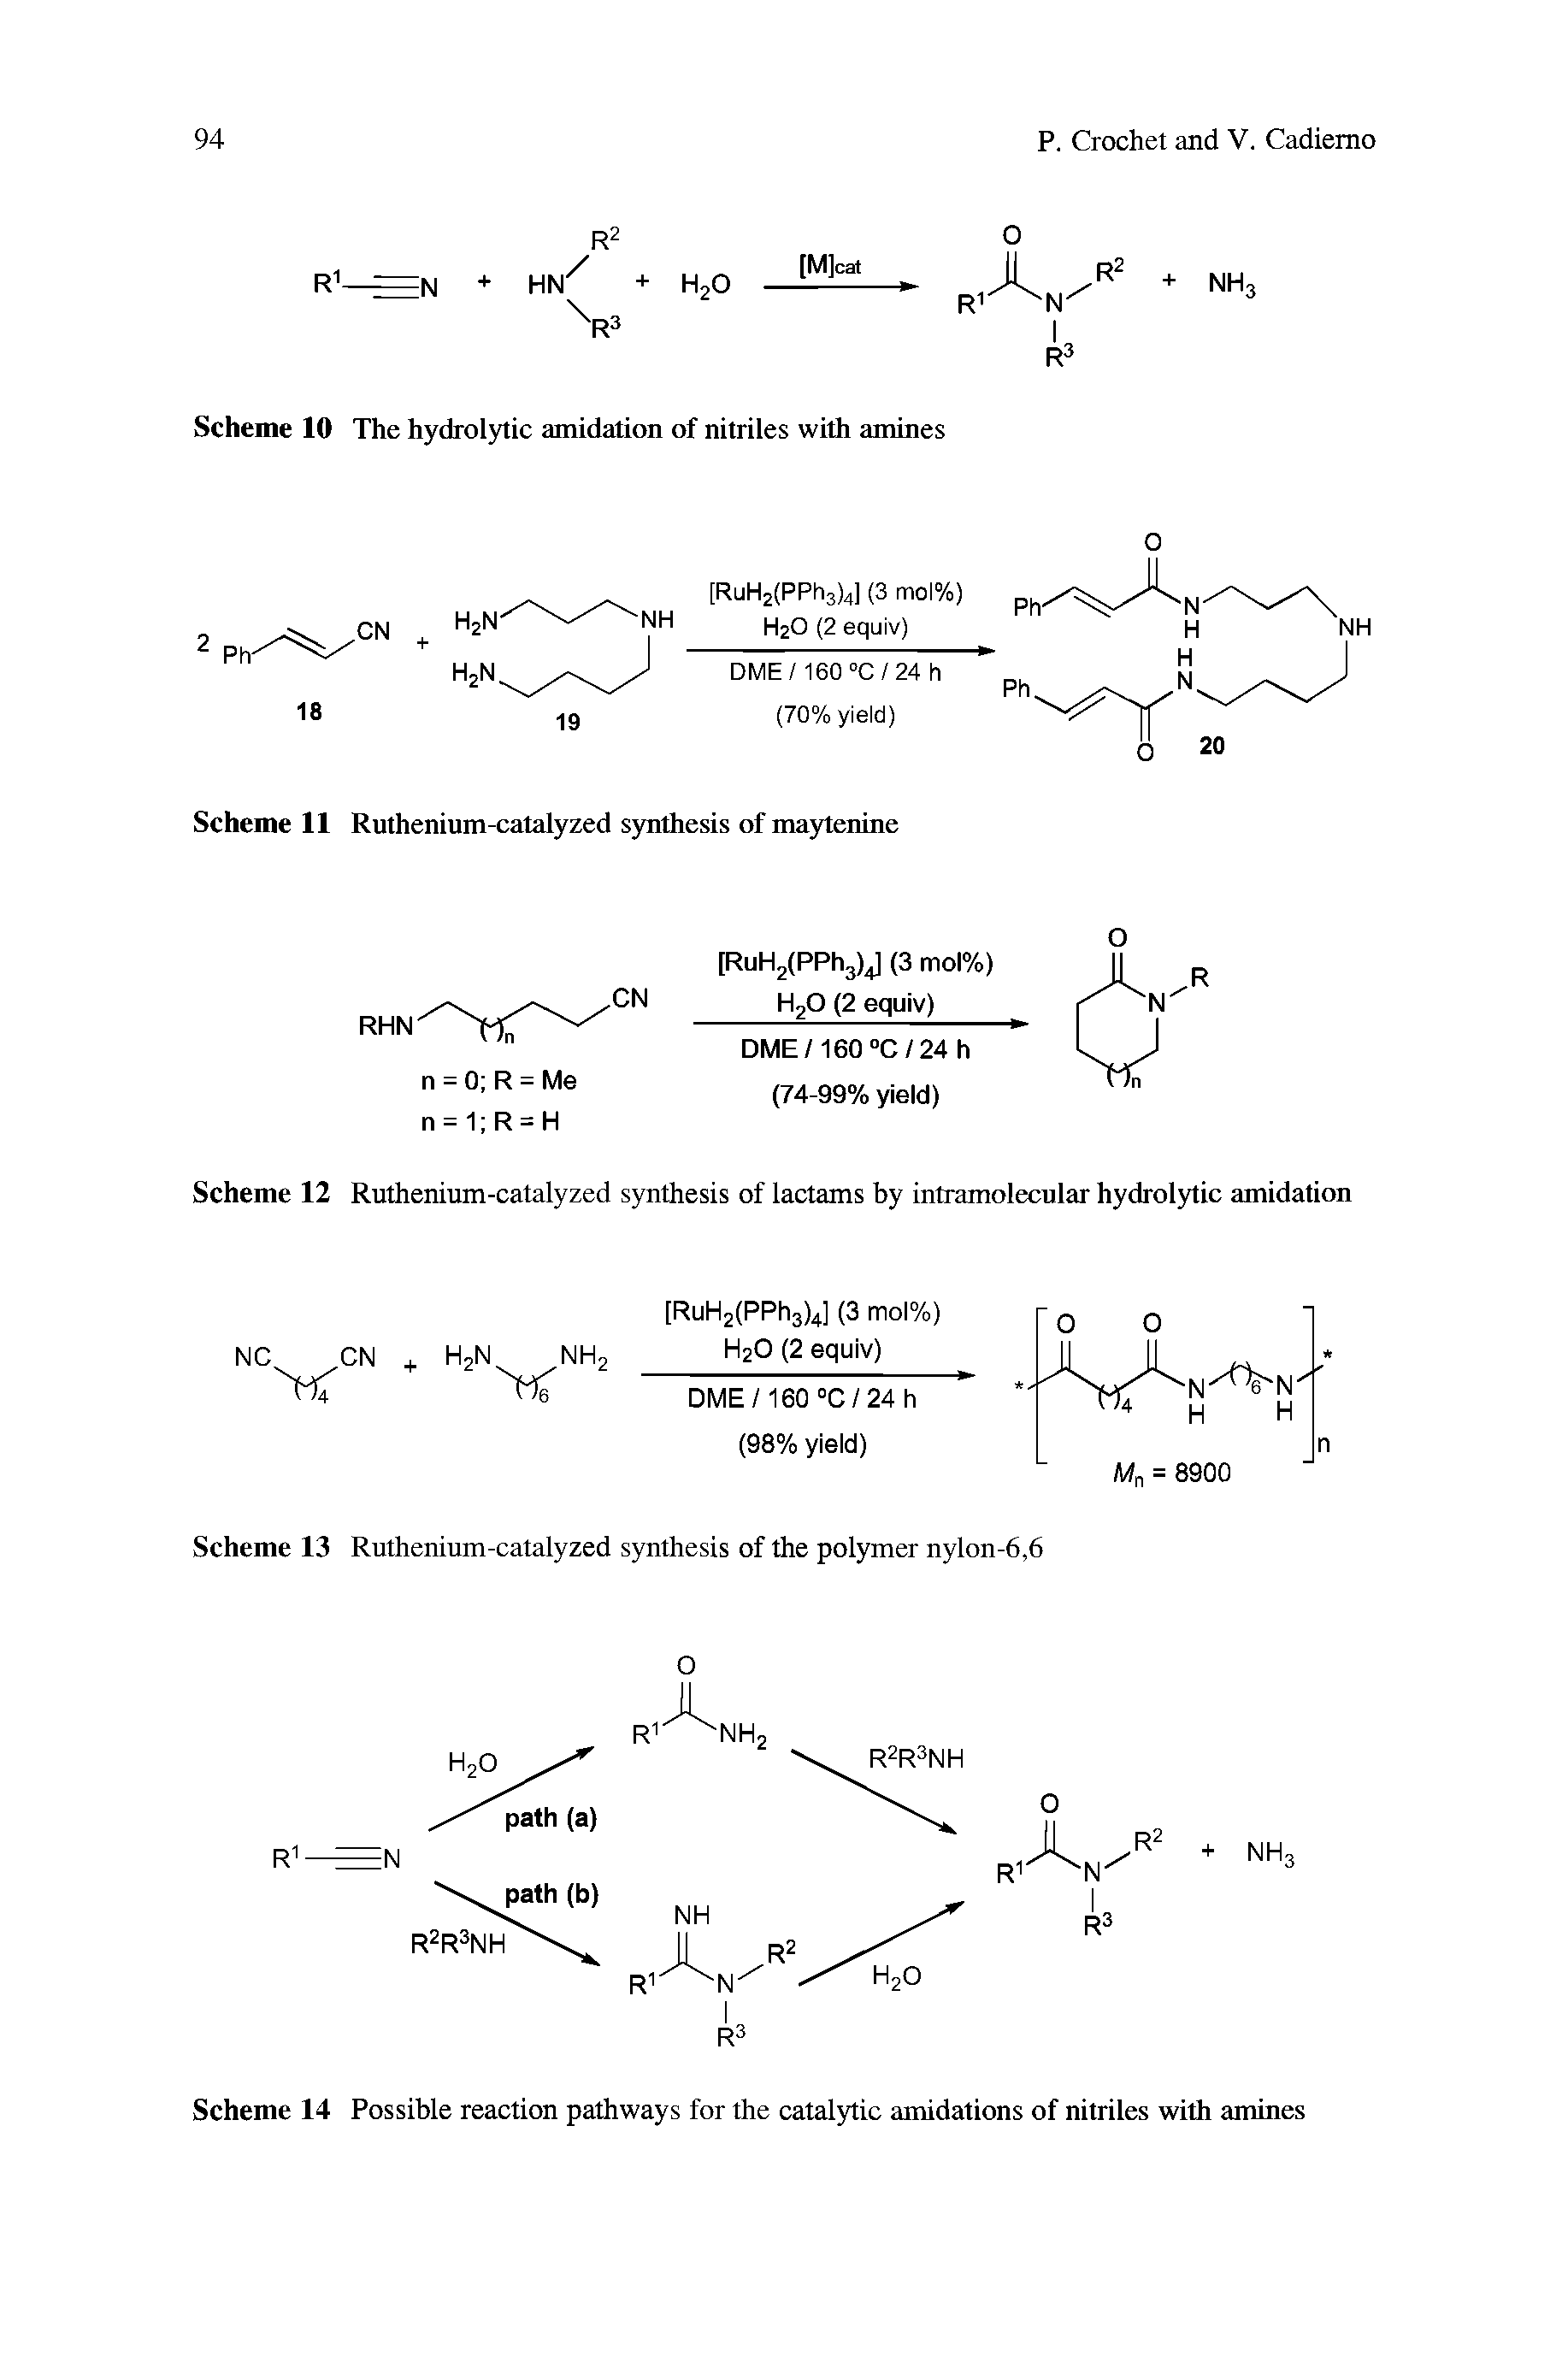 Scheme 10 The hydrolytic amidation of nitriles with amines...